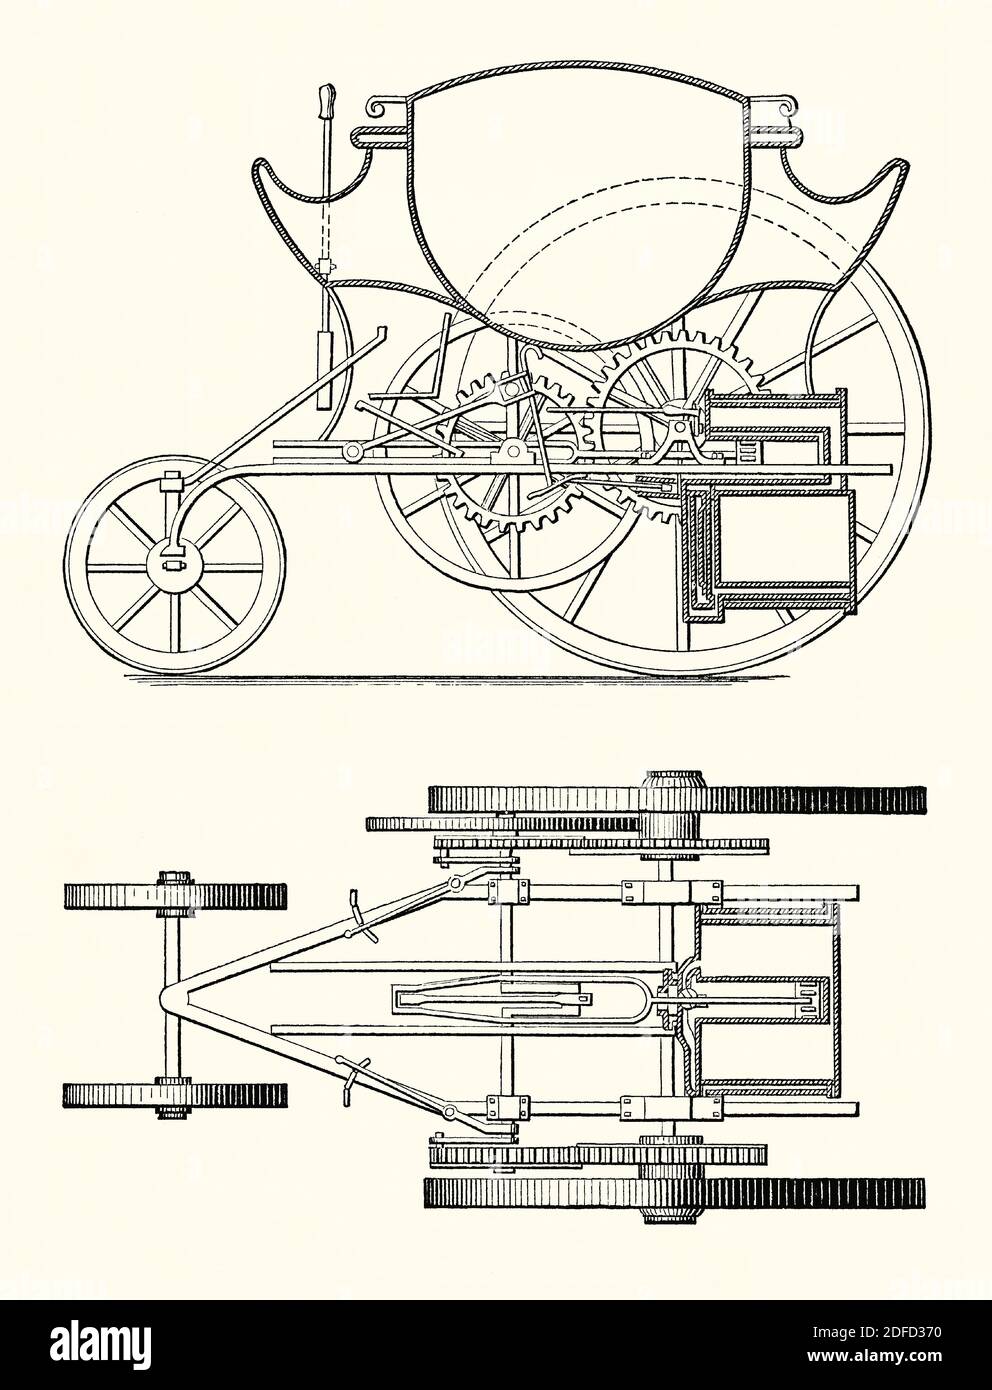 An old engraving showing a side and above view of Richard Trevithick’s steam carriage of 1803. It is from a Victorian mechanical engineering book of the 1880s. The London Steam Carriage was an early high-pressure, steam-powered road vehicle constructed by Trevithick (1771–1833) and patented in 1802. The next year the ‘London Steam Carriage’ was driven about 10 miles (16 km) through the streets of London, with seven or eight passengers, at a speed of 4–9 mph, the streets having been closed to other traffic. Later Trevithick and a colleague crashed the carriage and it was scrapped. Stock Photo